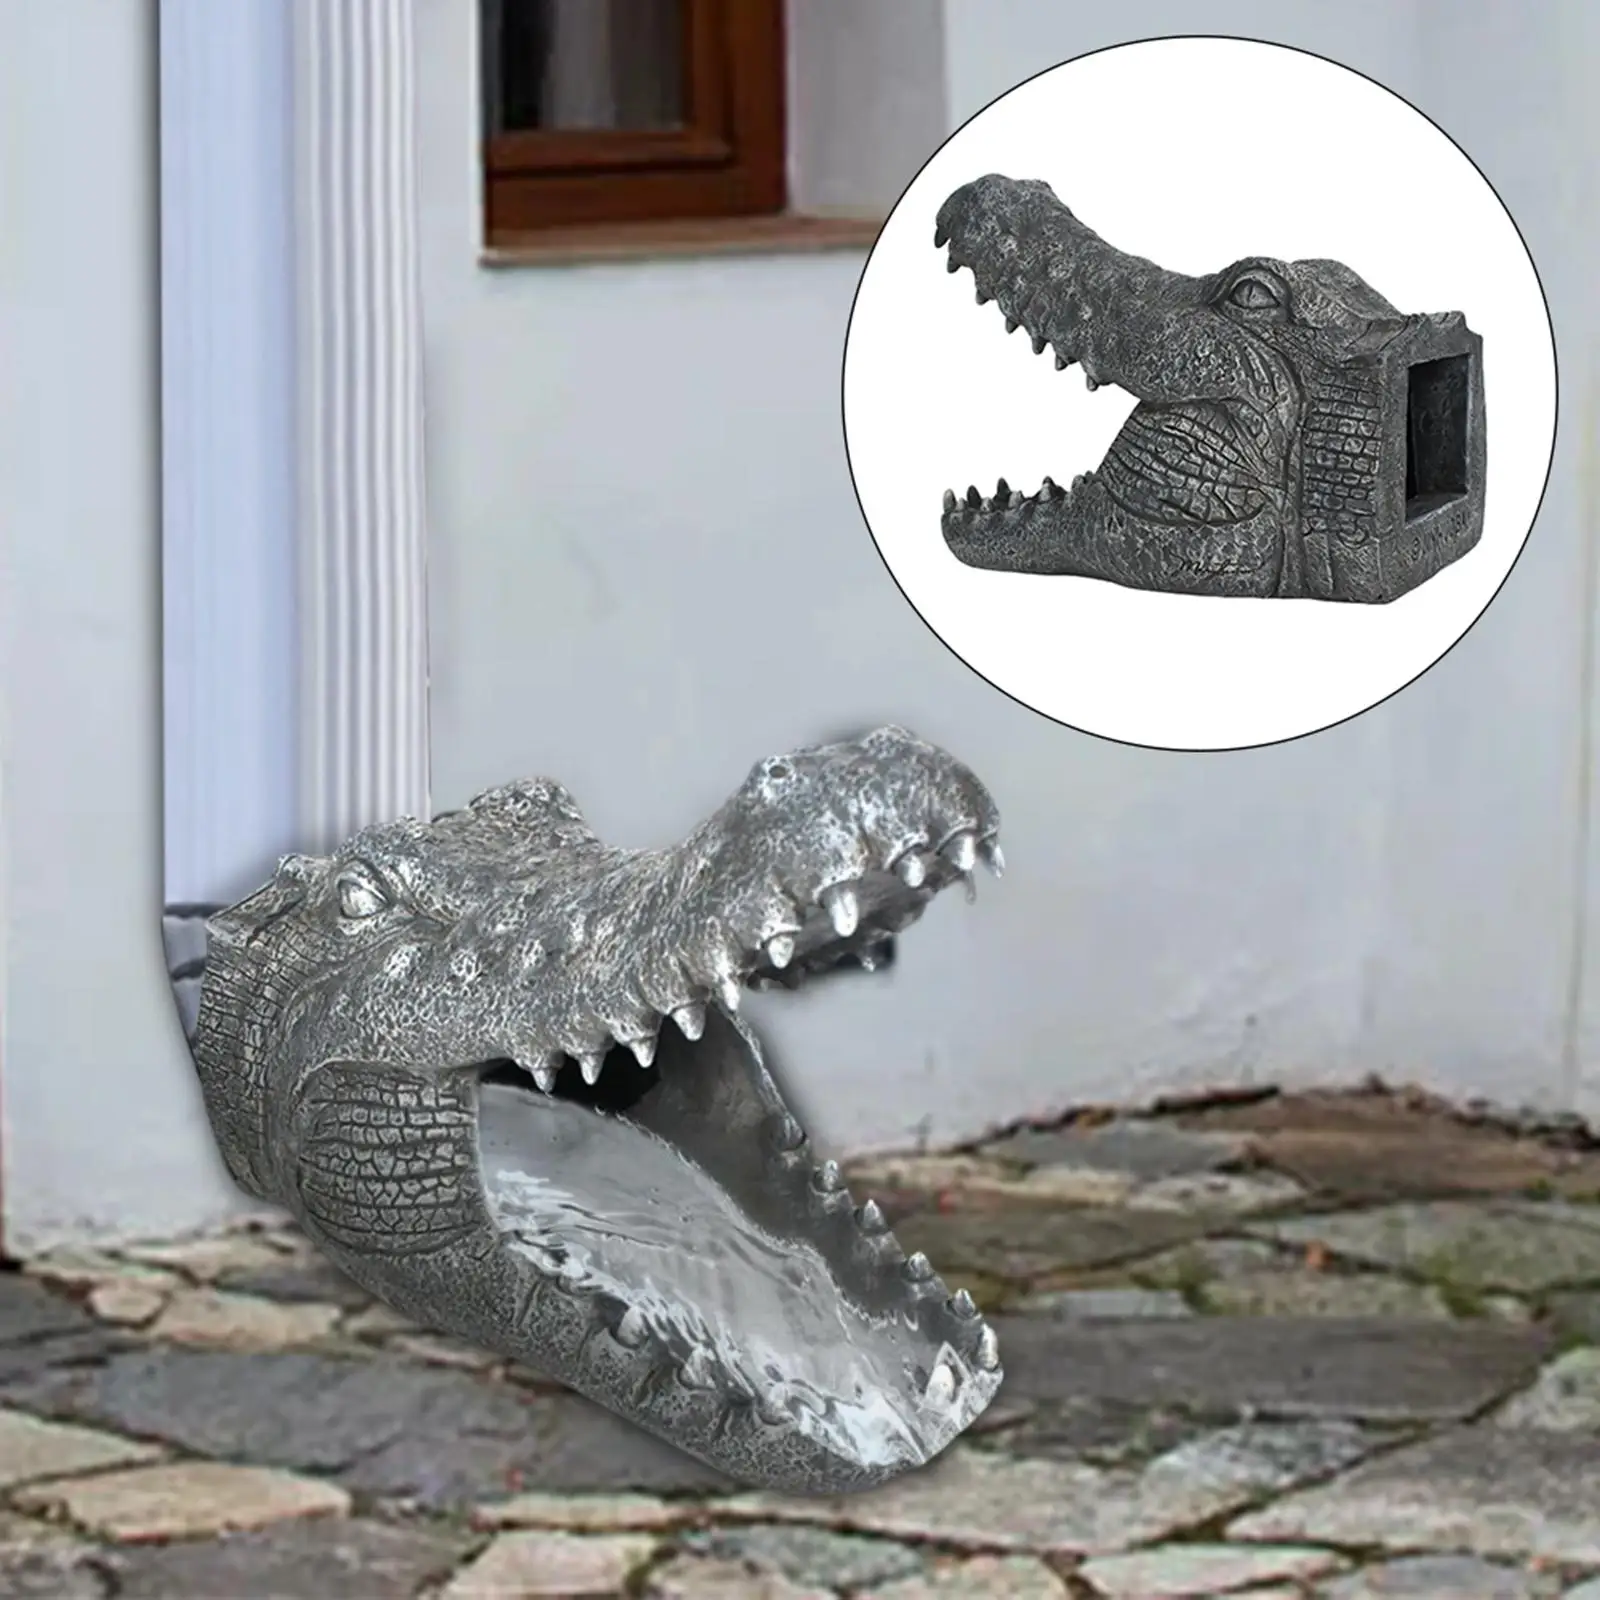 Generic Crocodile Shaped Downspout Gutter Guard Gutter Spout Crafts Accessories Resin Statue Extension Drain Pipe for Villa 